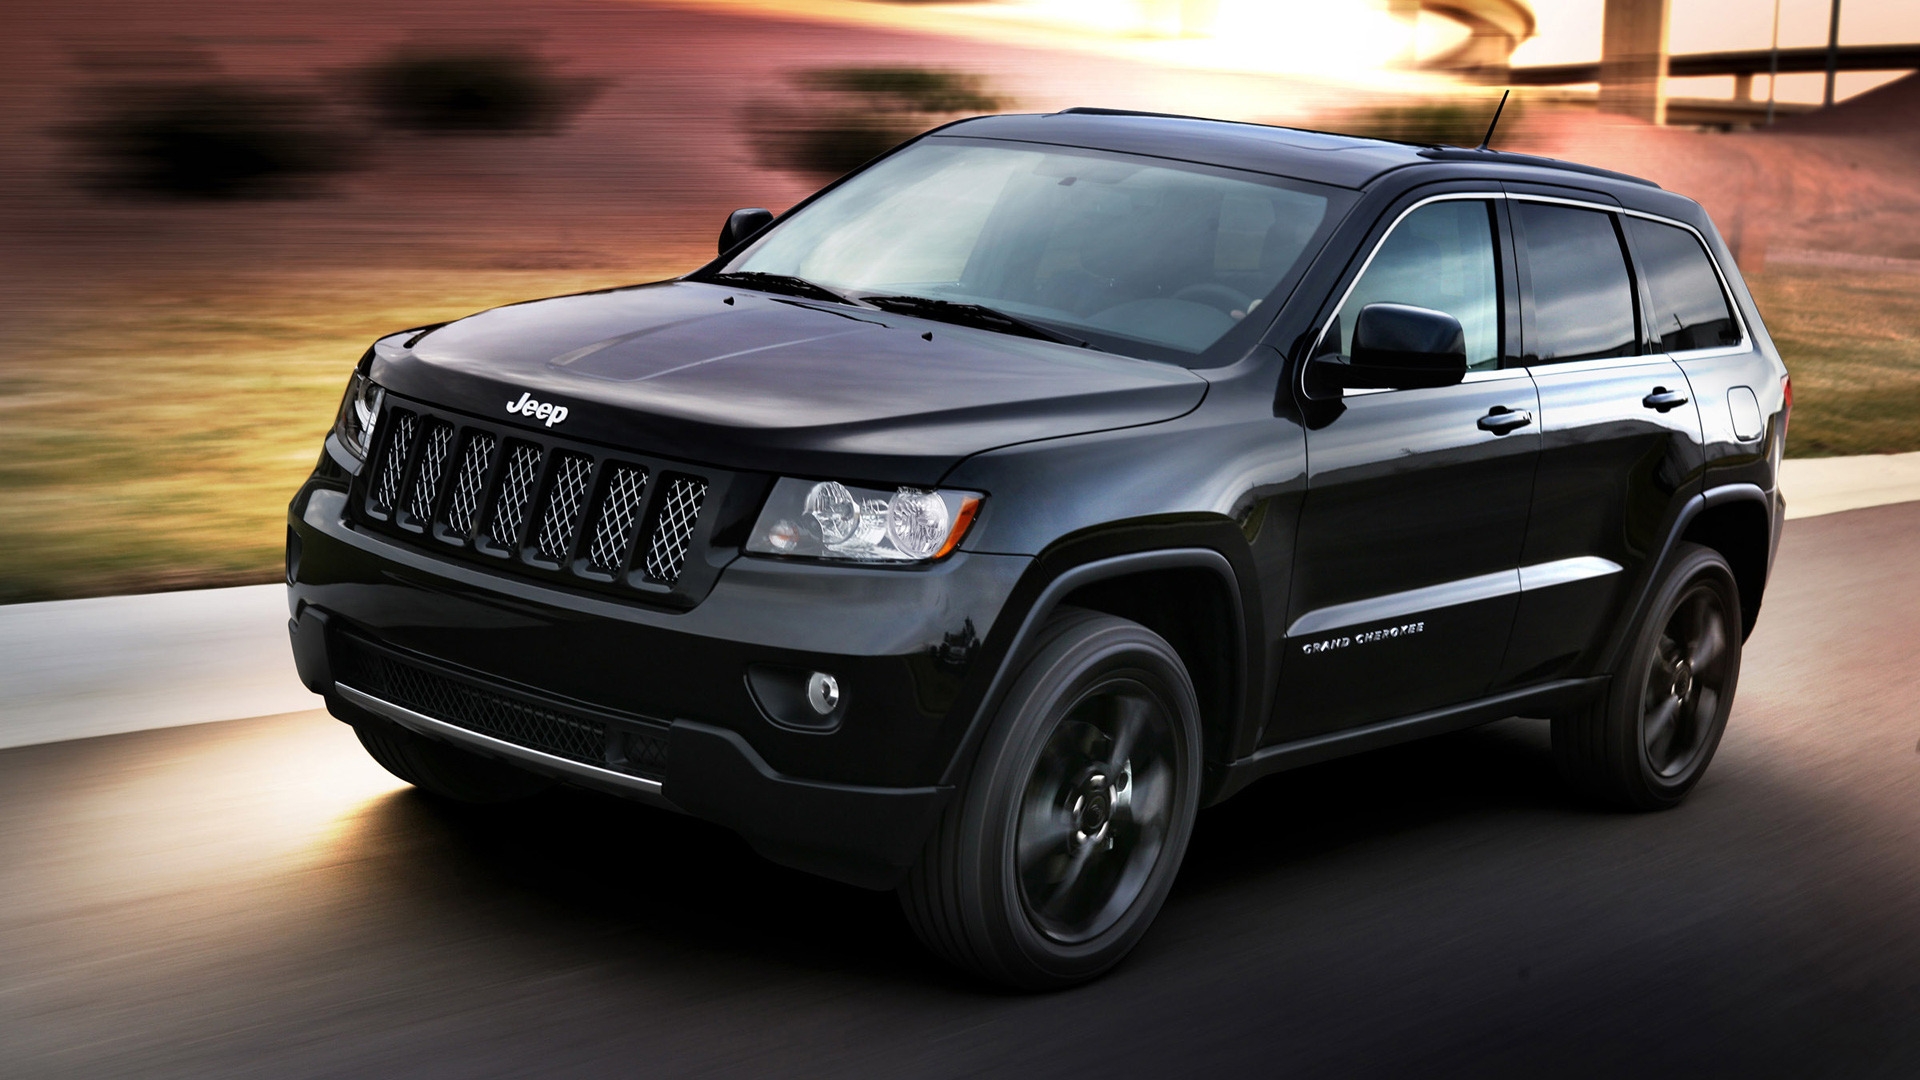 Jeep Grand Cherokee Speed Concept for 1920 x 1080 HDTV 1080p resolution